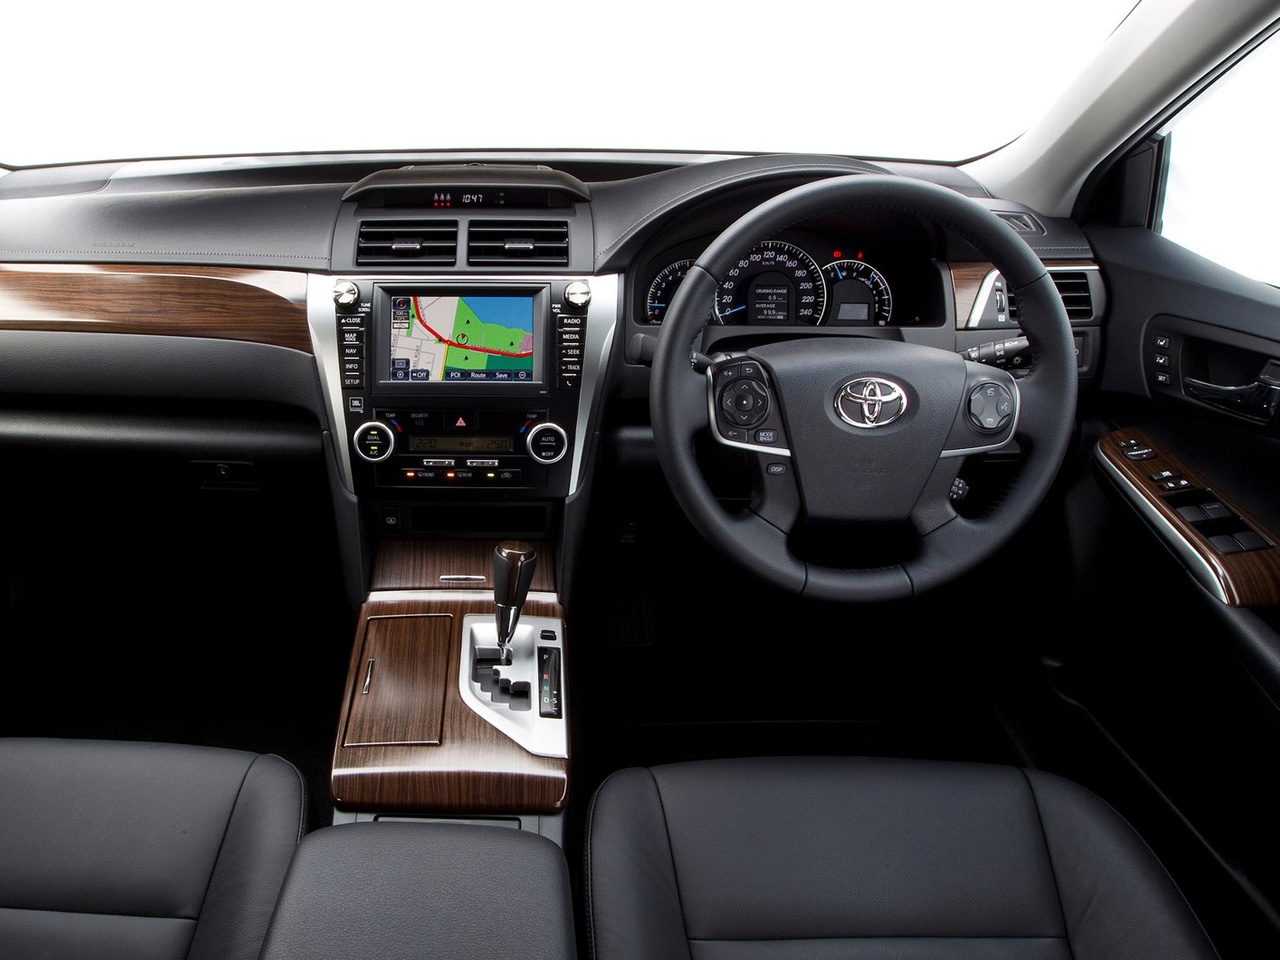 2009 Toyota aurion prodigy review